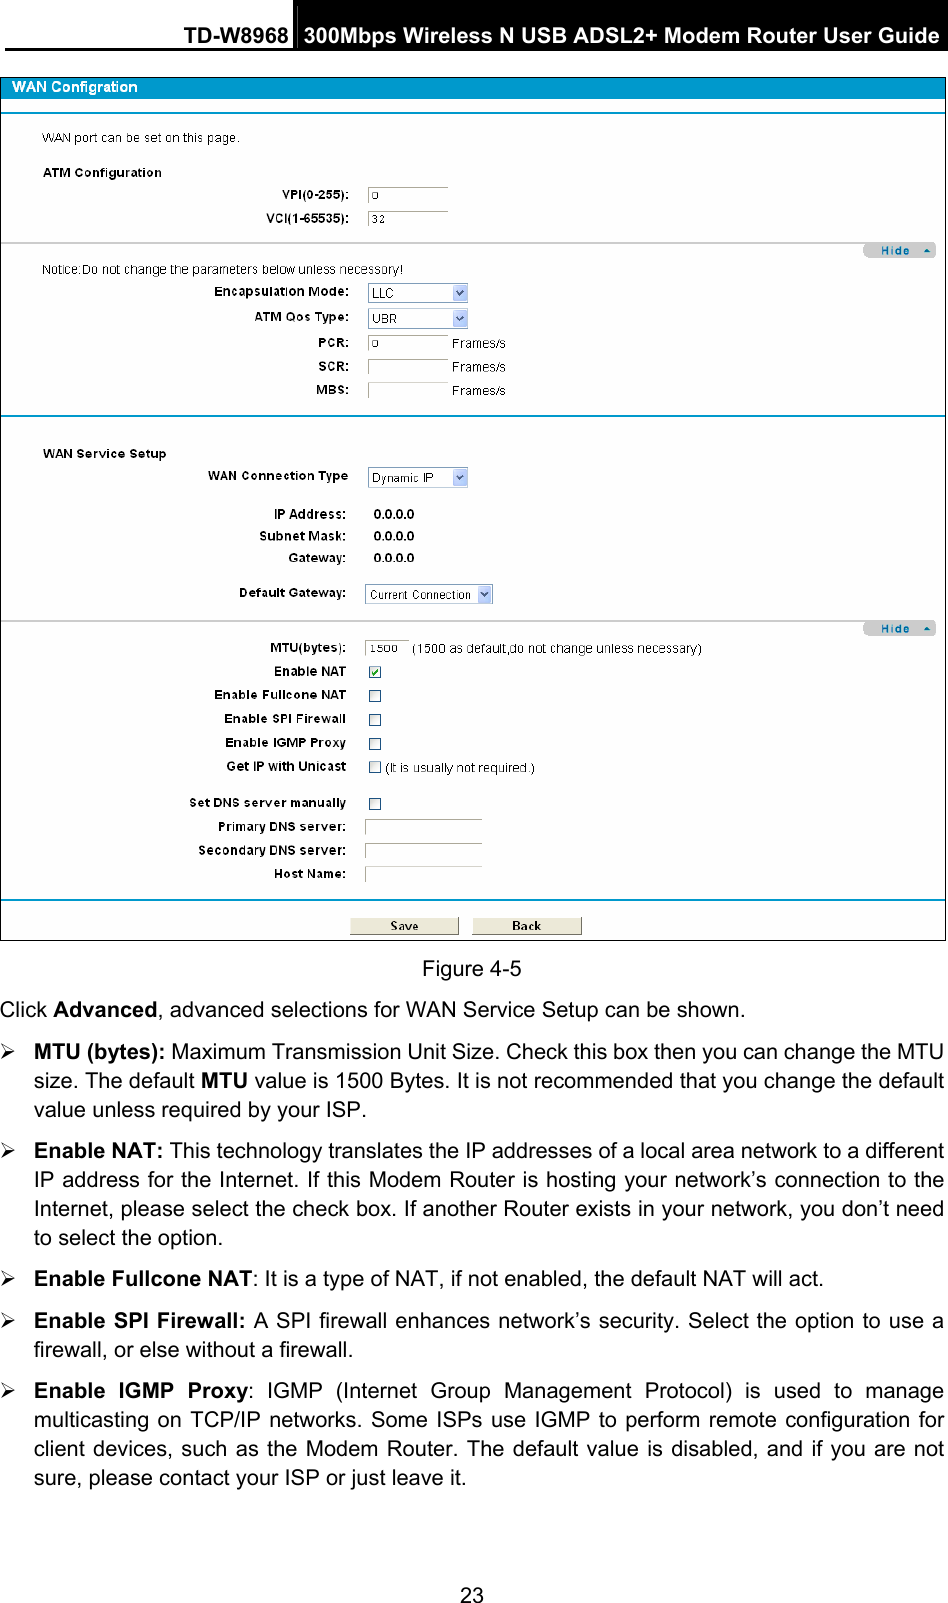 TD-W8968  300Mbps Wireless N USB ADSL2+ Modem Router User Guide 23  Figure 4-5 Click Advanced, advanced selections for WAN Service Setup can be shown. ¾ MTU (bytes): Maximum Transmission Unit Size. Check this box then you can change the MTU size. The default MTU value is 1500 Bytes. It is not recommended that you change the default value unless required by your ISP. ¾ Enable NAT: This technology translates the IP addresses of a local area network to a different IP address for the Internet. If this Modem Router is hosting your network’s connection to the Internet, please select the check box. If another Router exists in your network, you don’t need to select the option. ¾ Enable Fullcone NAT: It is a type of NAT, if not enabled, the default NAT will act. ¾ Enable SPI Firewall: A SPI firewall enhances network’s security. Select the option to use a firewall, or else without a firewall. ¾ Enable IGMP Proxy: IGMP (Internet Group Management Protocol) is used to manage multicasting on TCP/IP networks. Some ISPs use IGMP to perform remote configuration for client devices, such as the Modem Router. The default value is disabled, and if you are not sure, please contact your ISP or just leave it. 